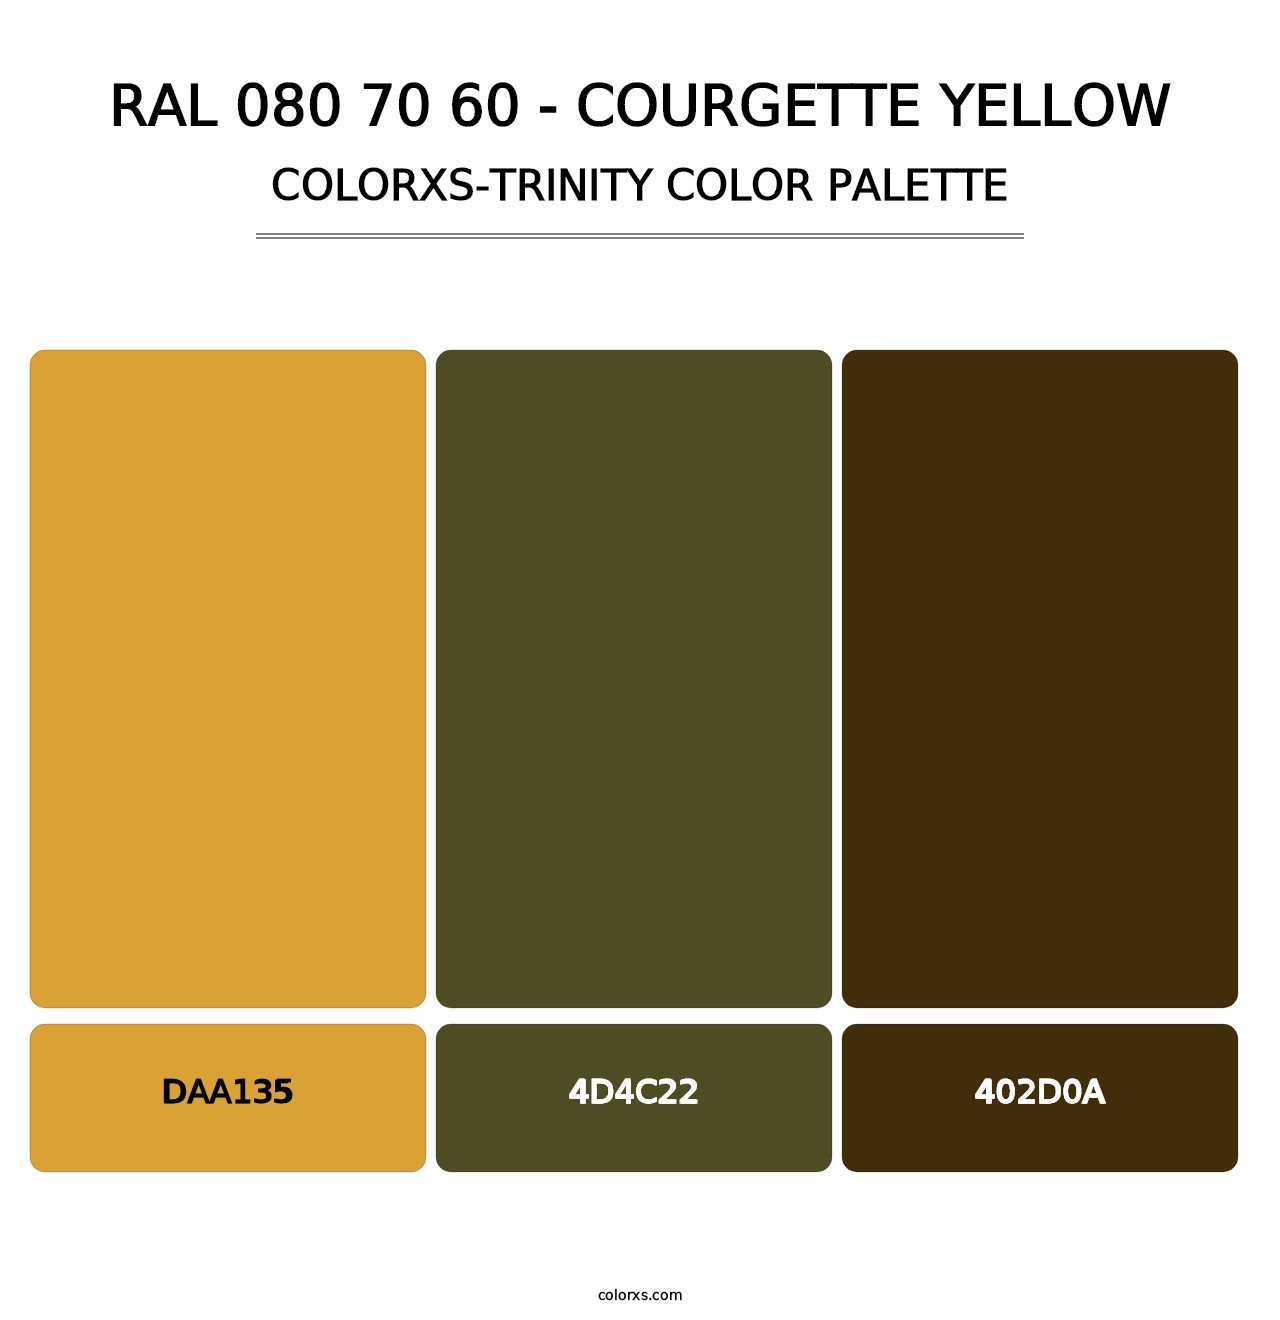 RAL 080 70 60 - Courgette Yellow - Colorxs Trinity Palette